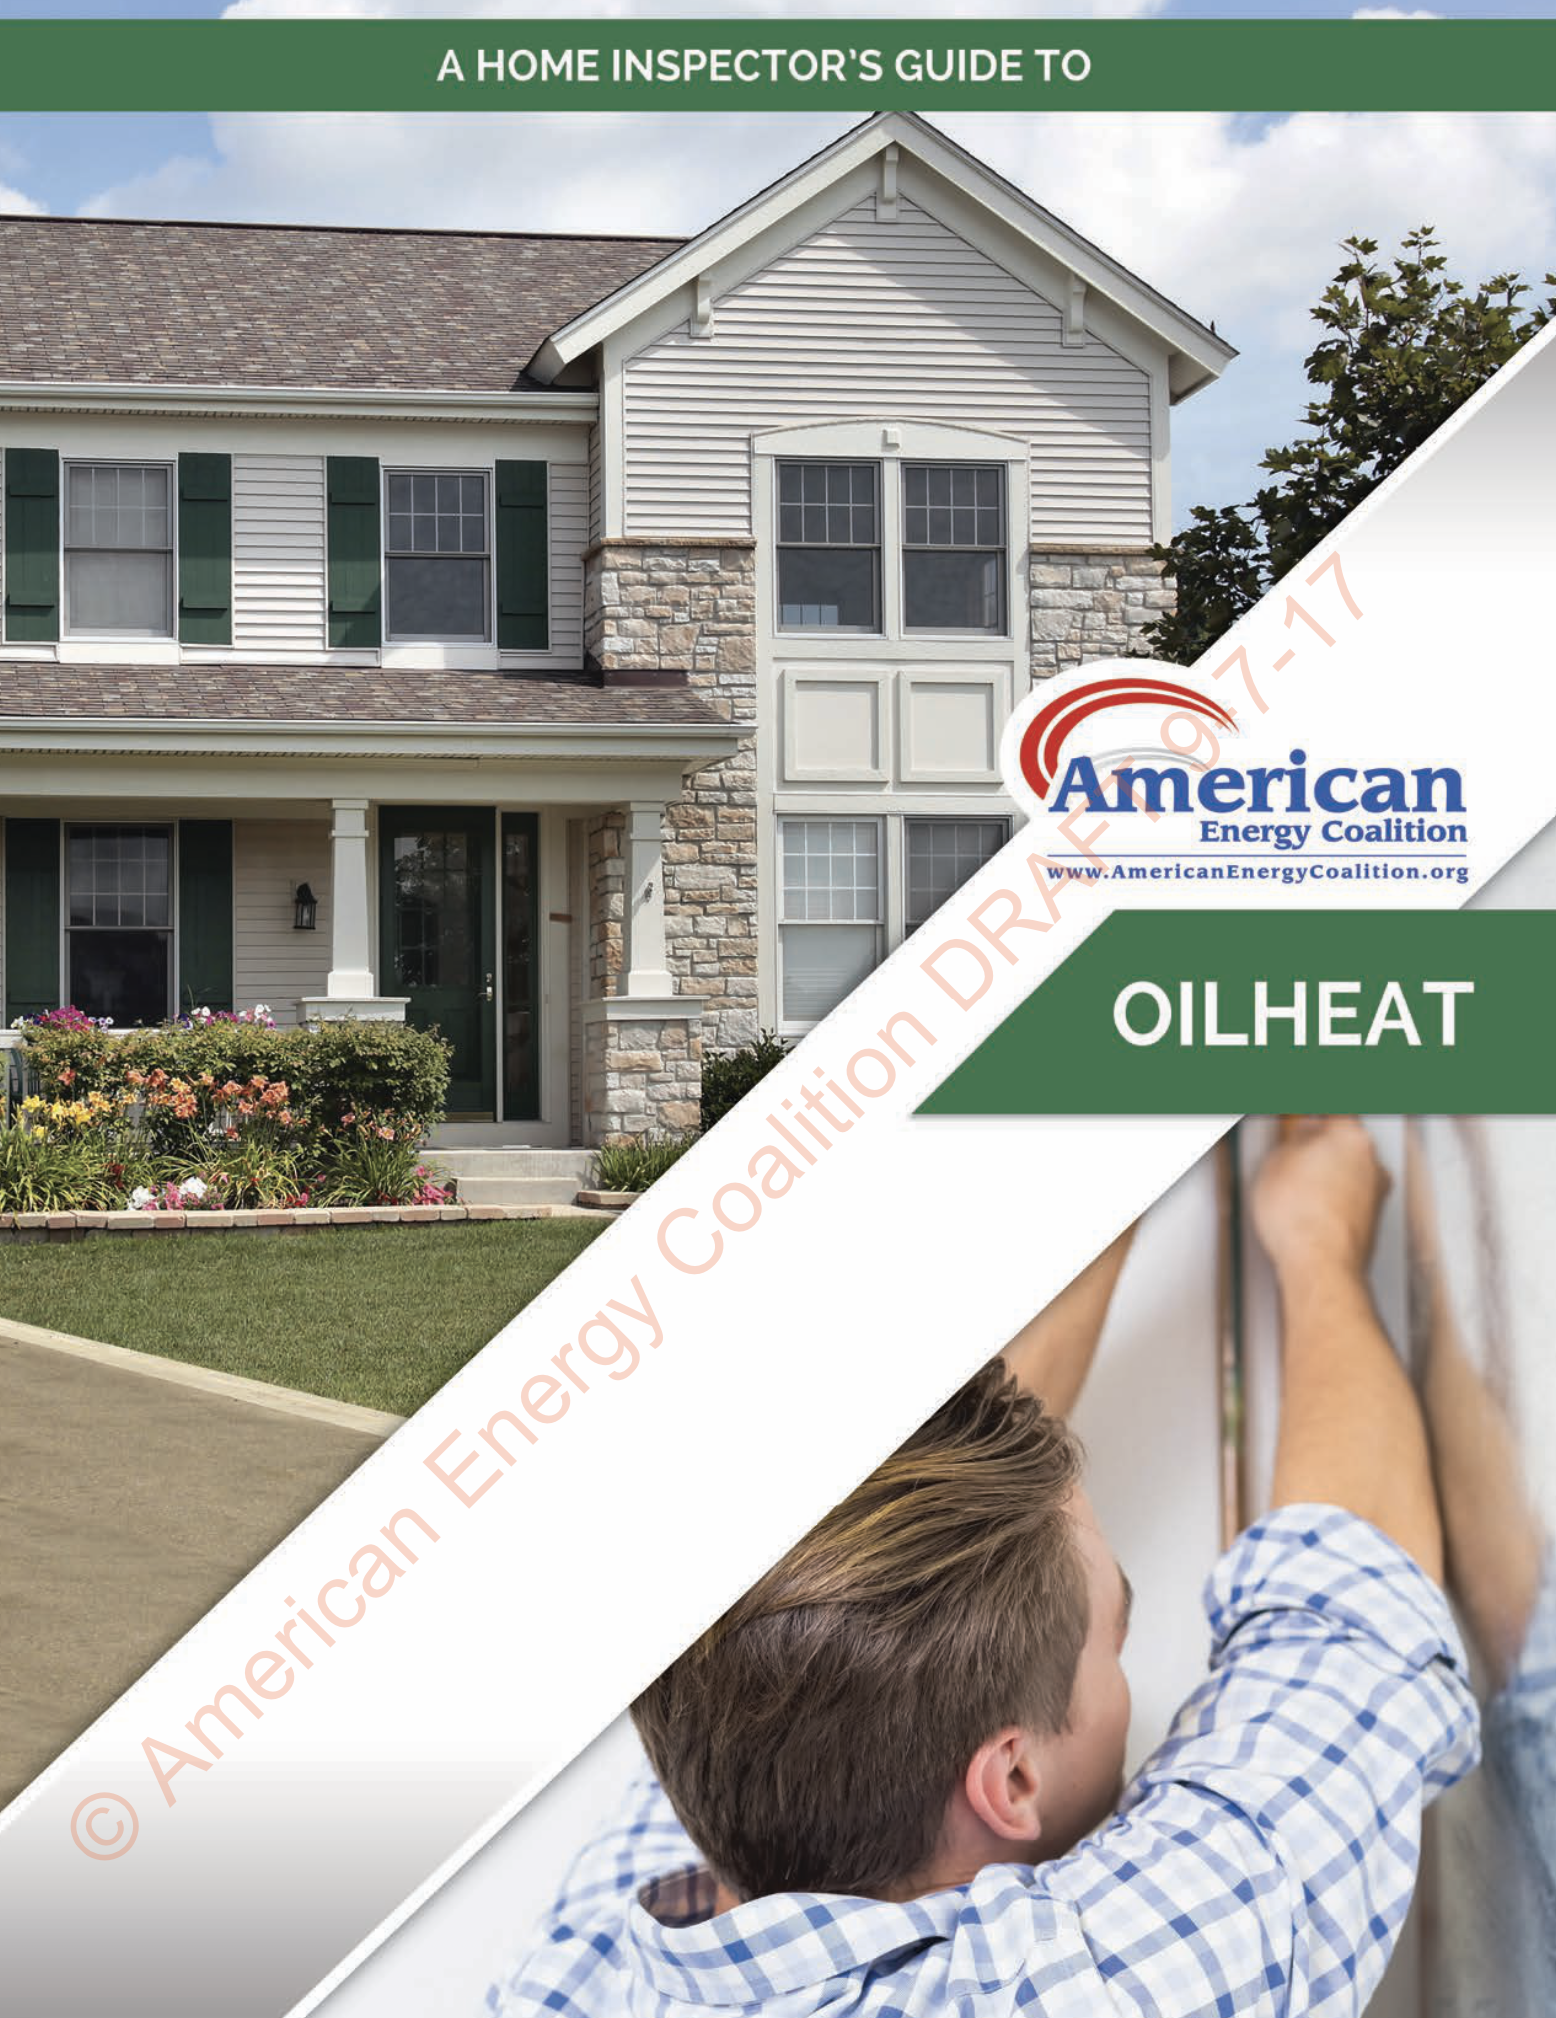 Home Inspectors Guide to Oilheat